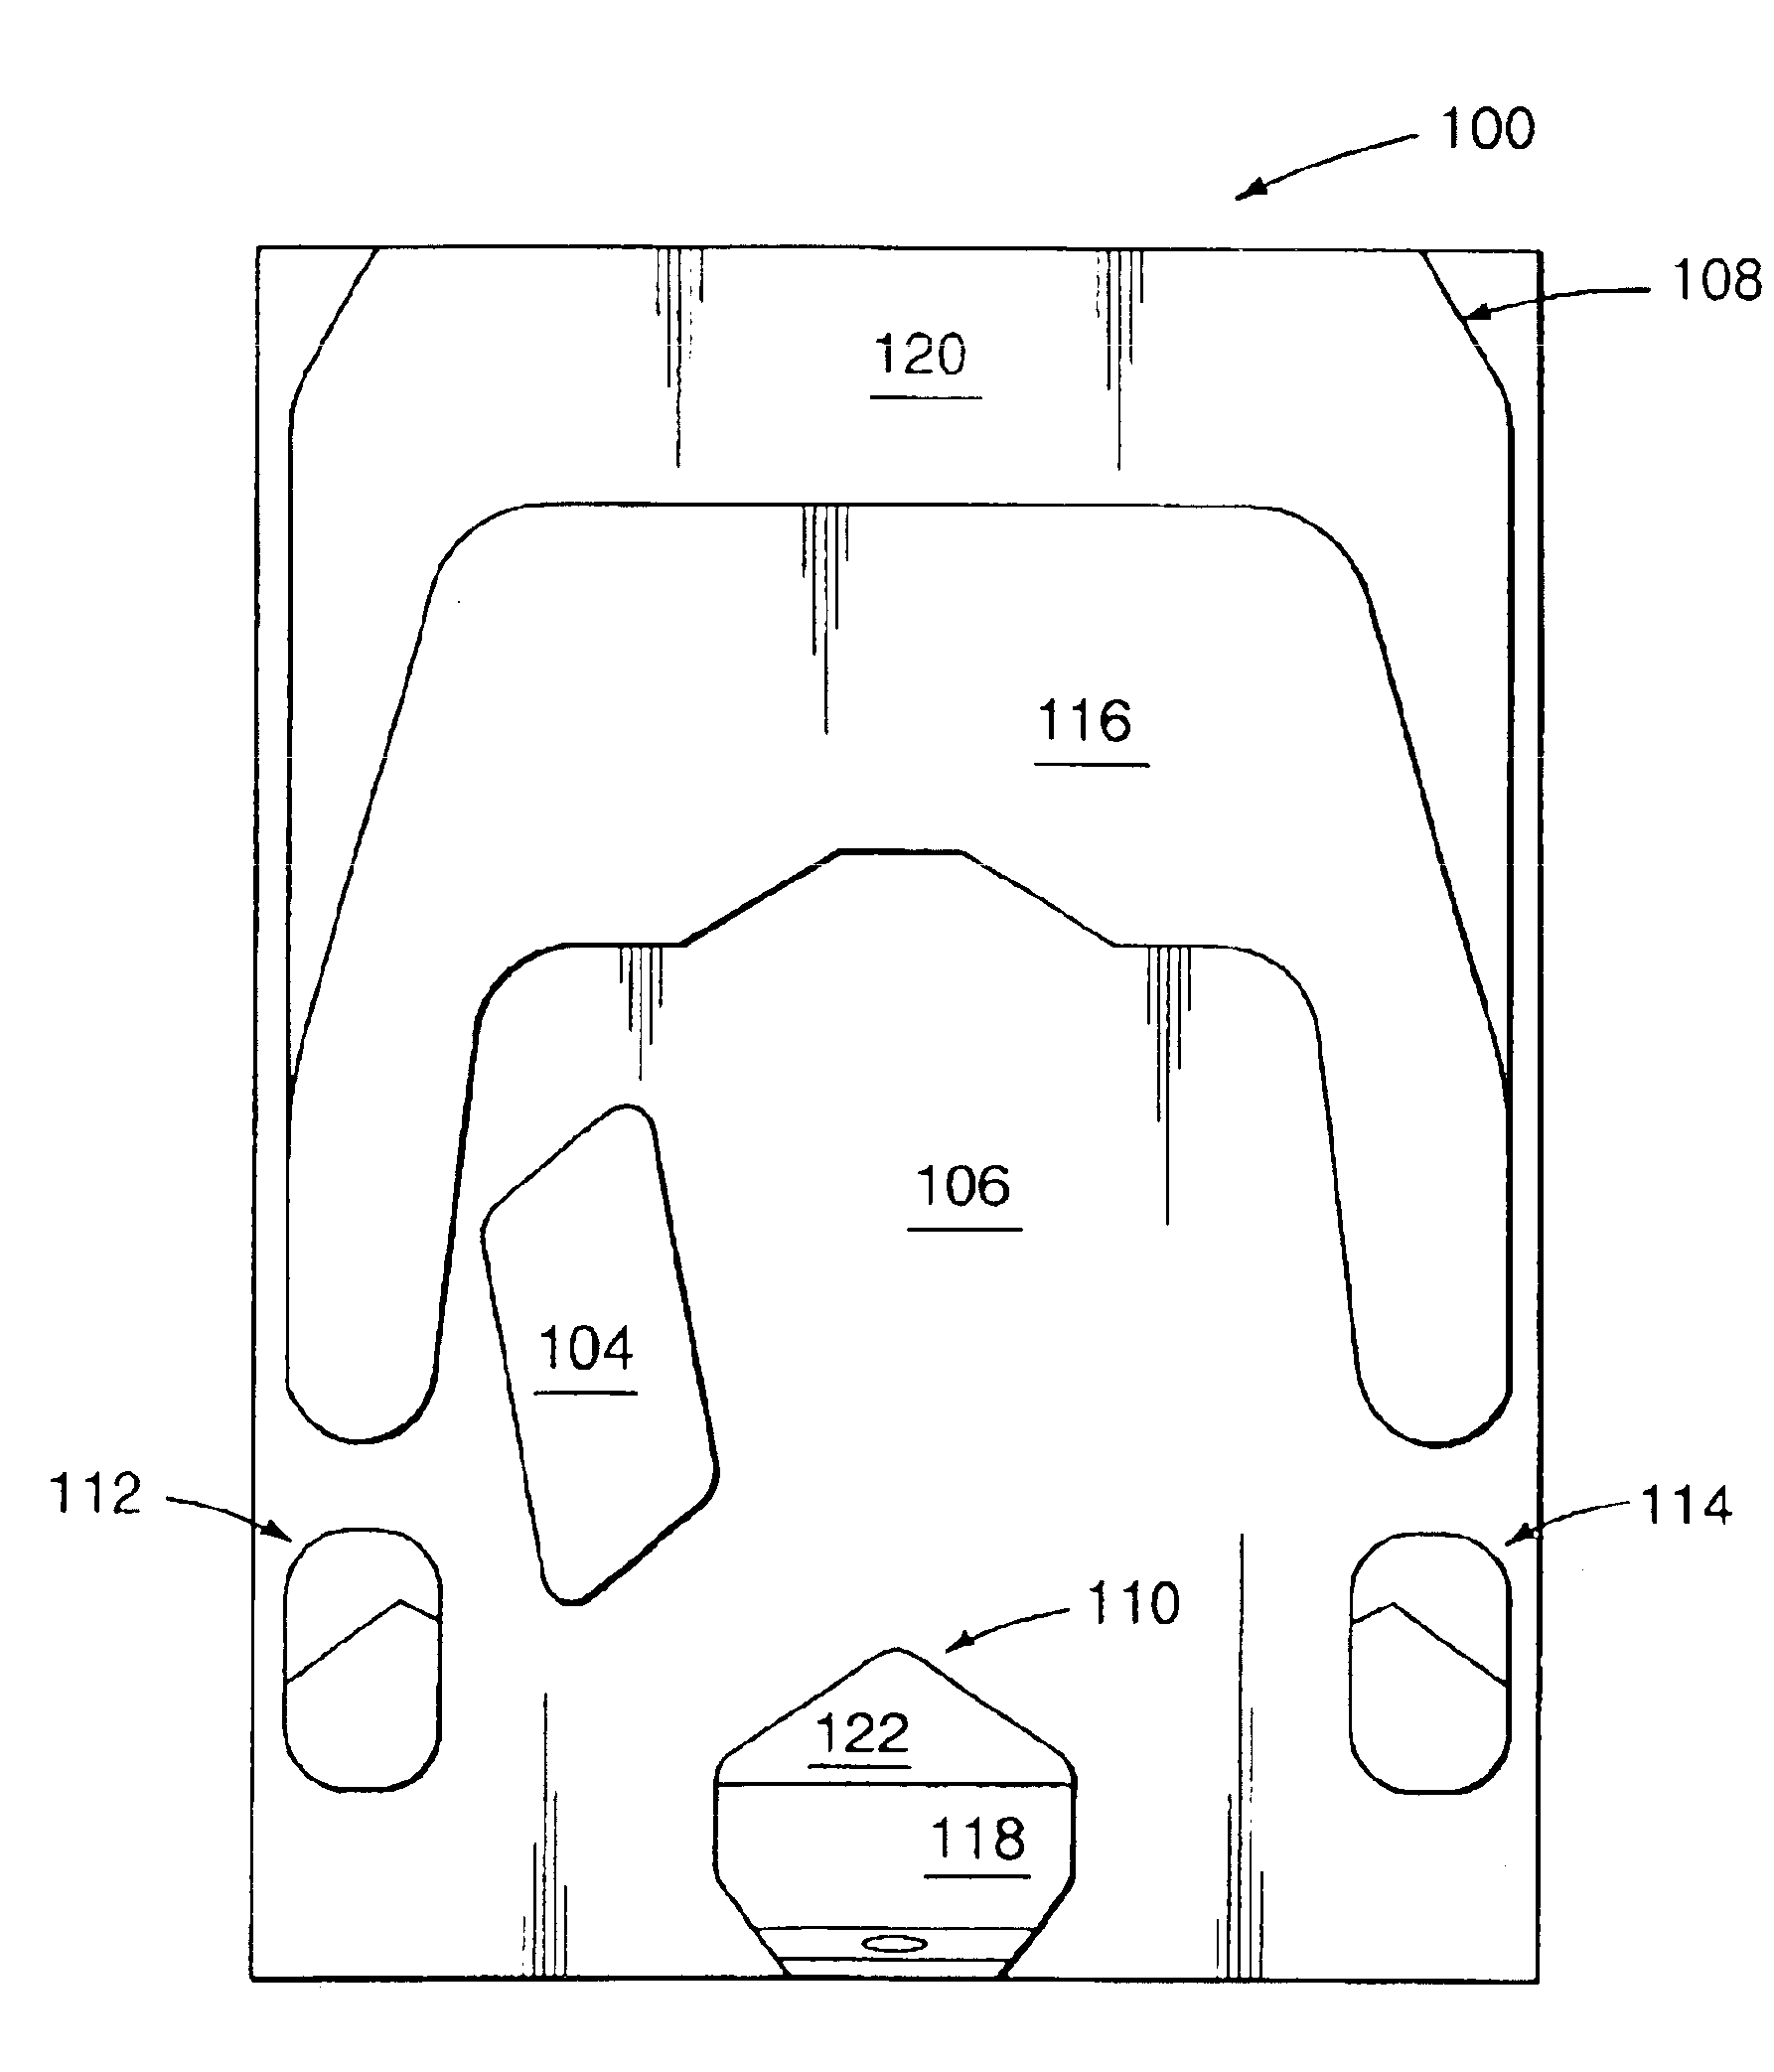 Air bearing having a cavity patch surface coplanar with a leading edge pad surface